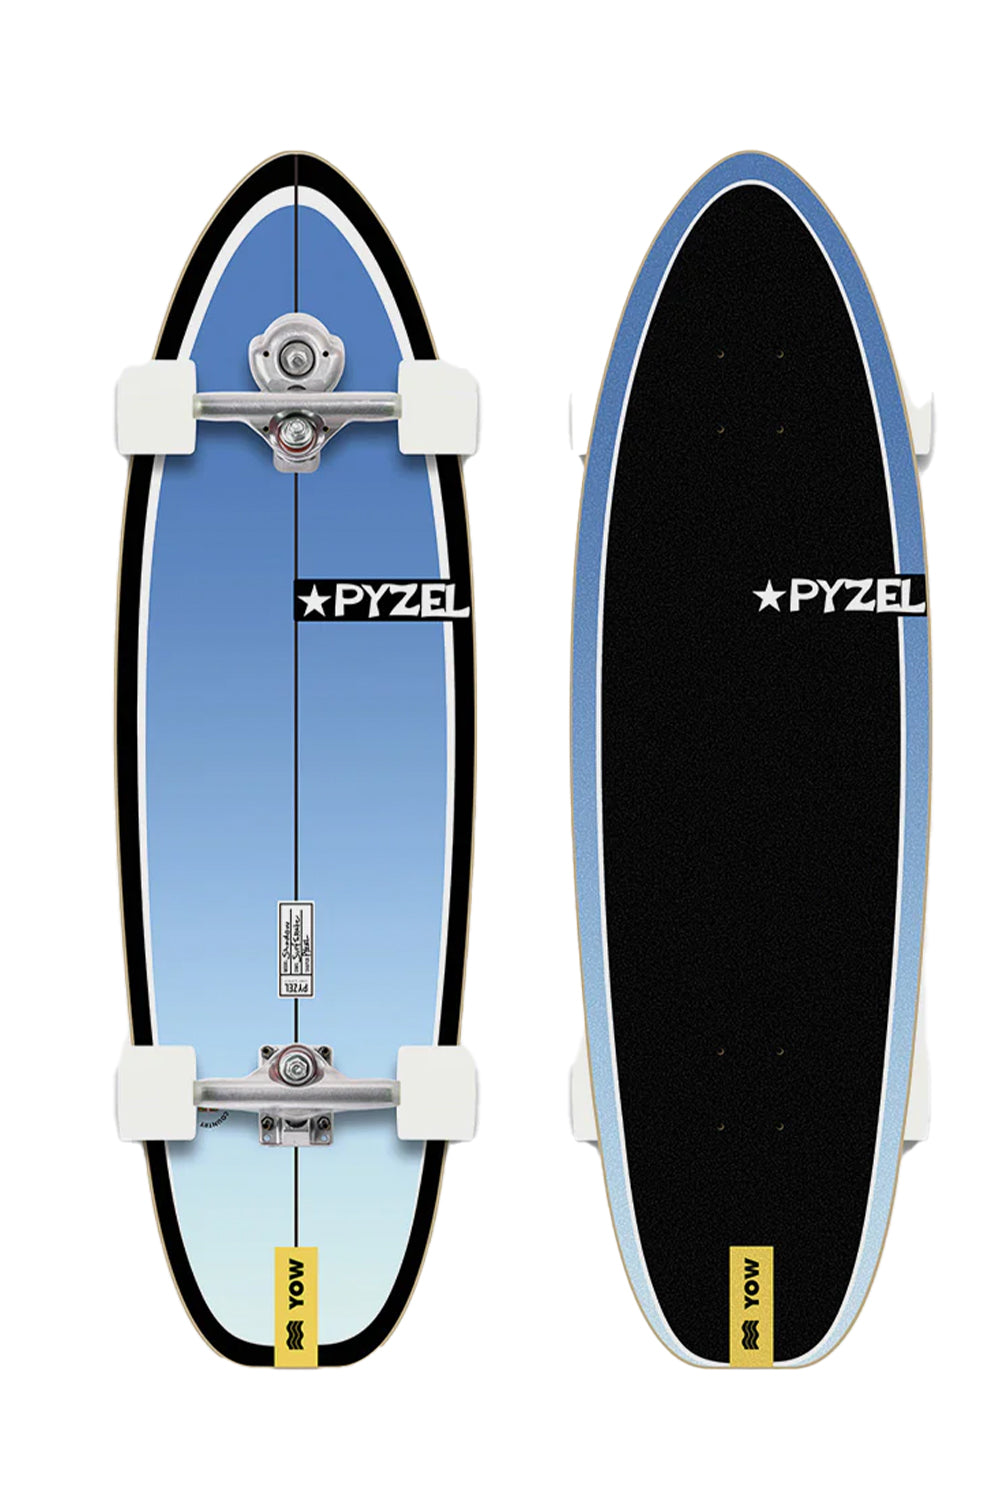 YOW Pyzel Shadow 34" Surfskate